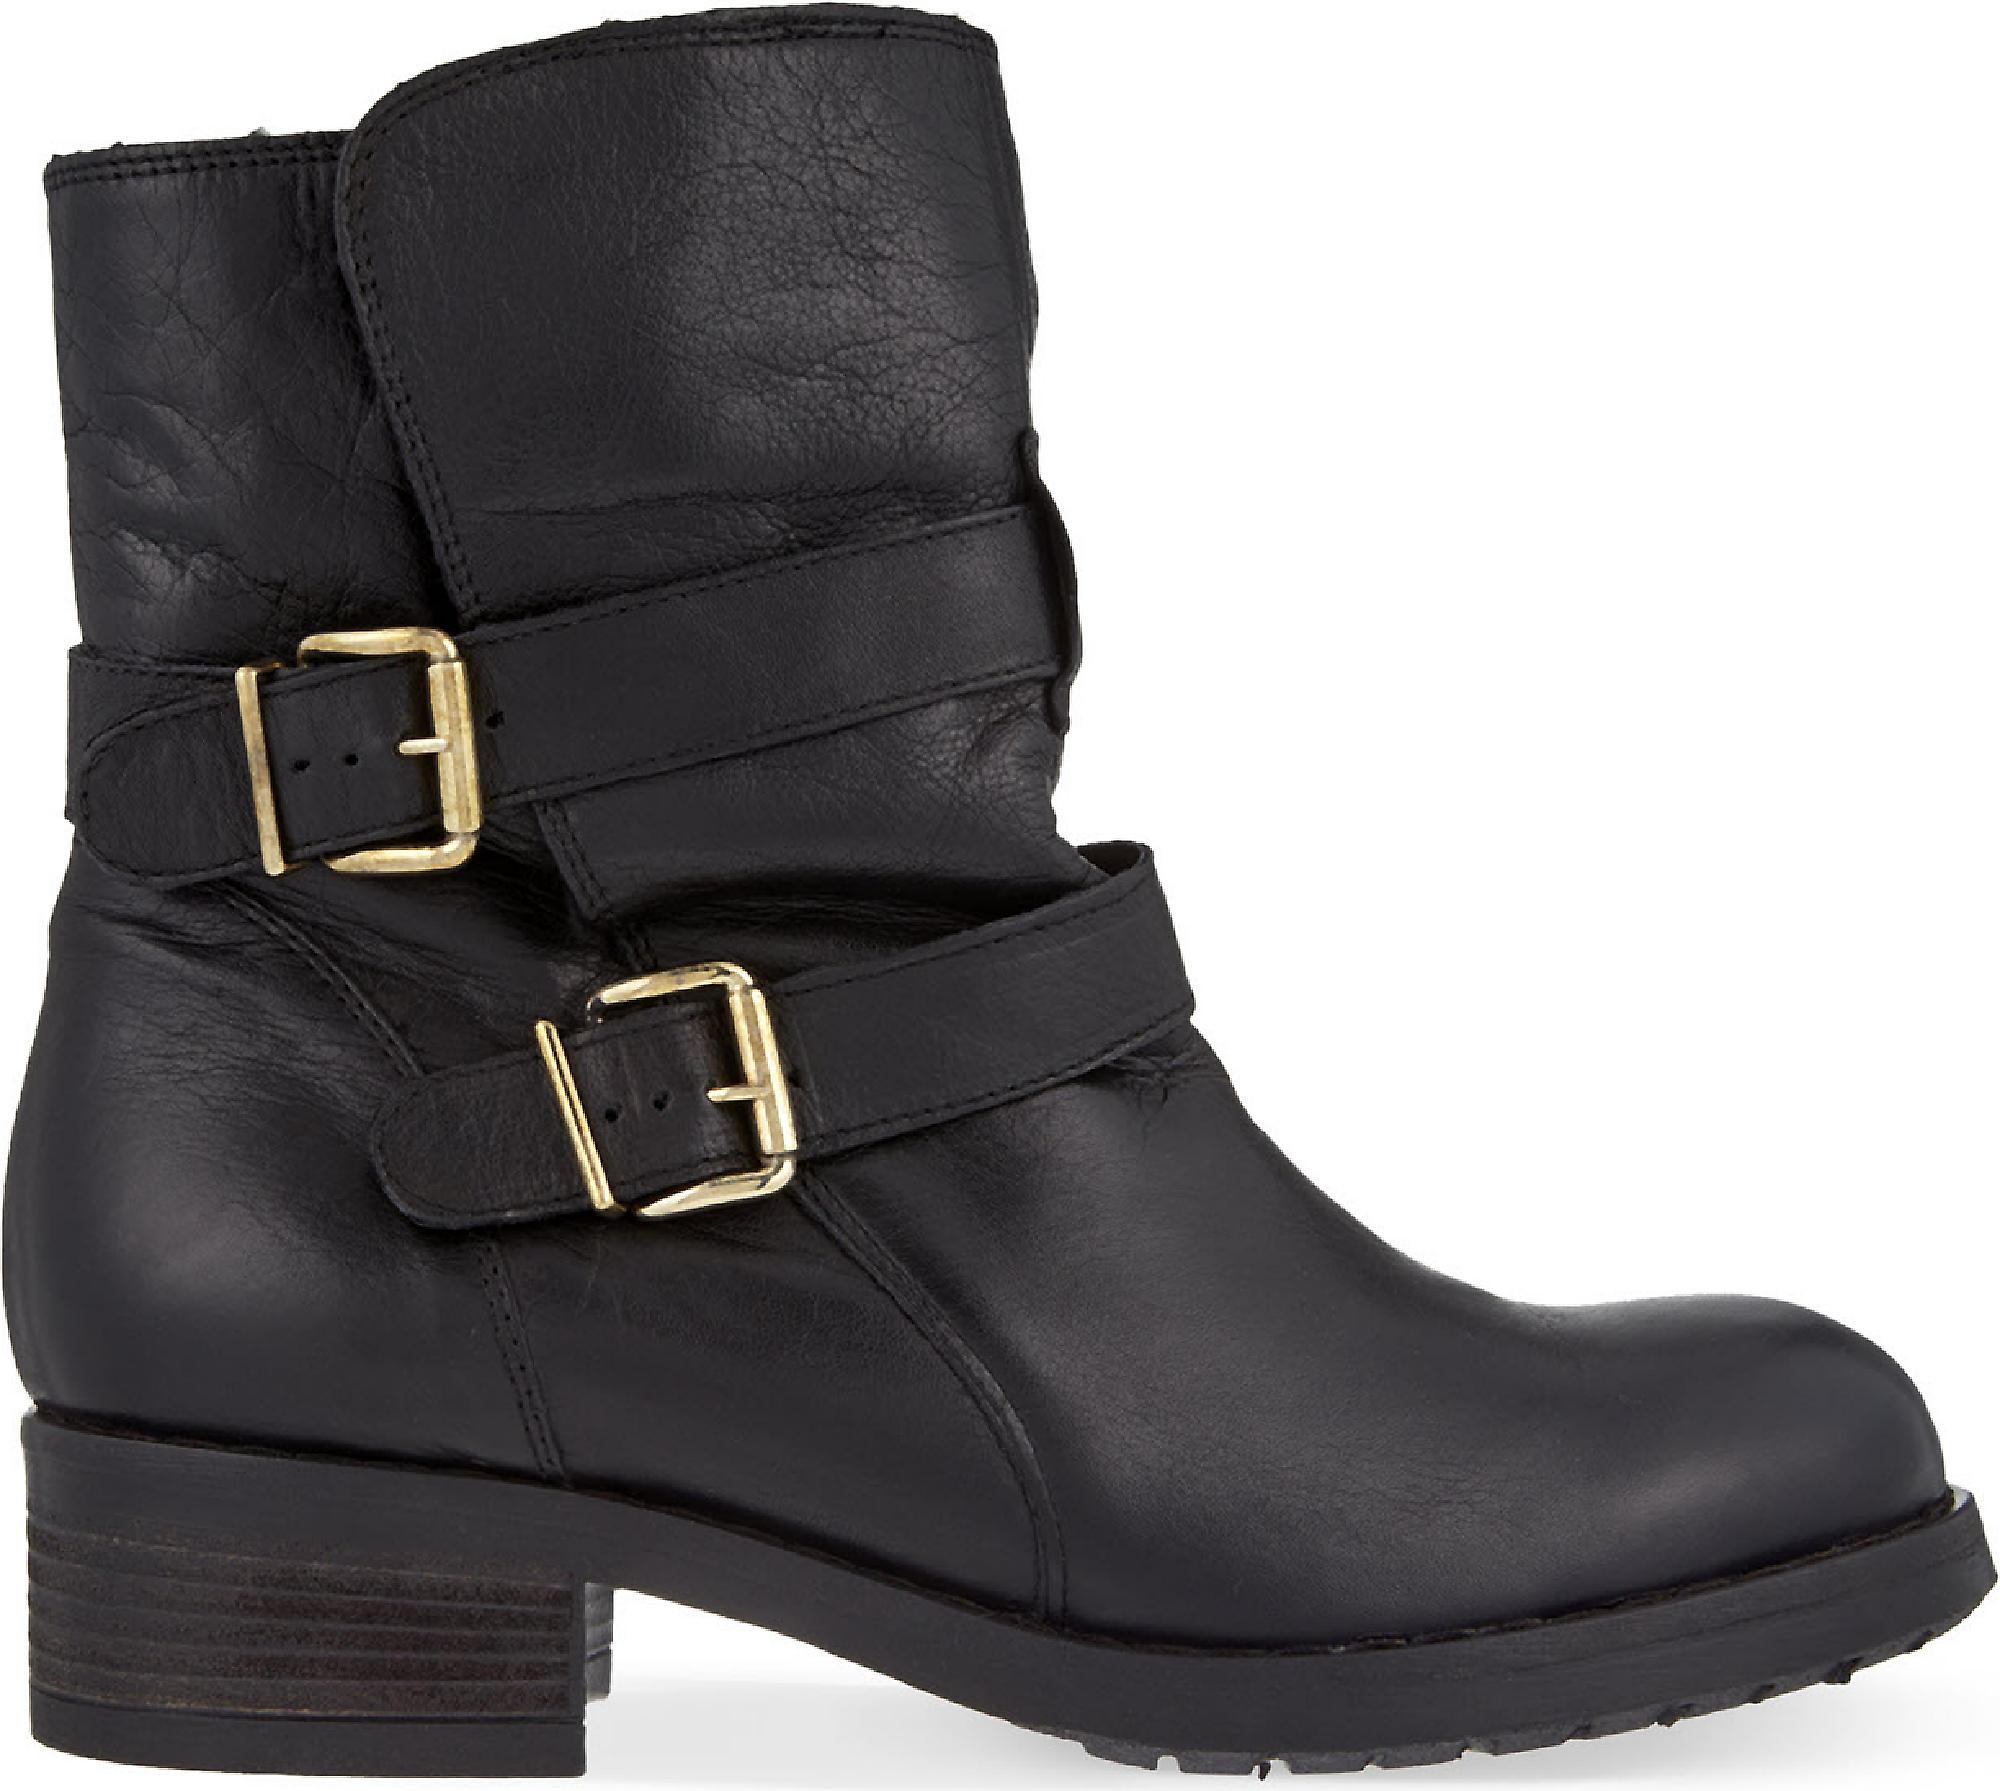 Kurt Geiger Richmond Leather Ankle Boots in Black - Lyst